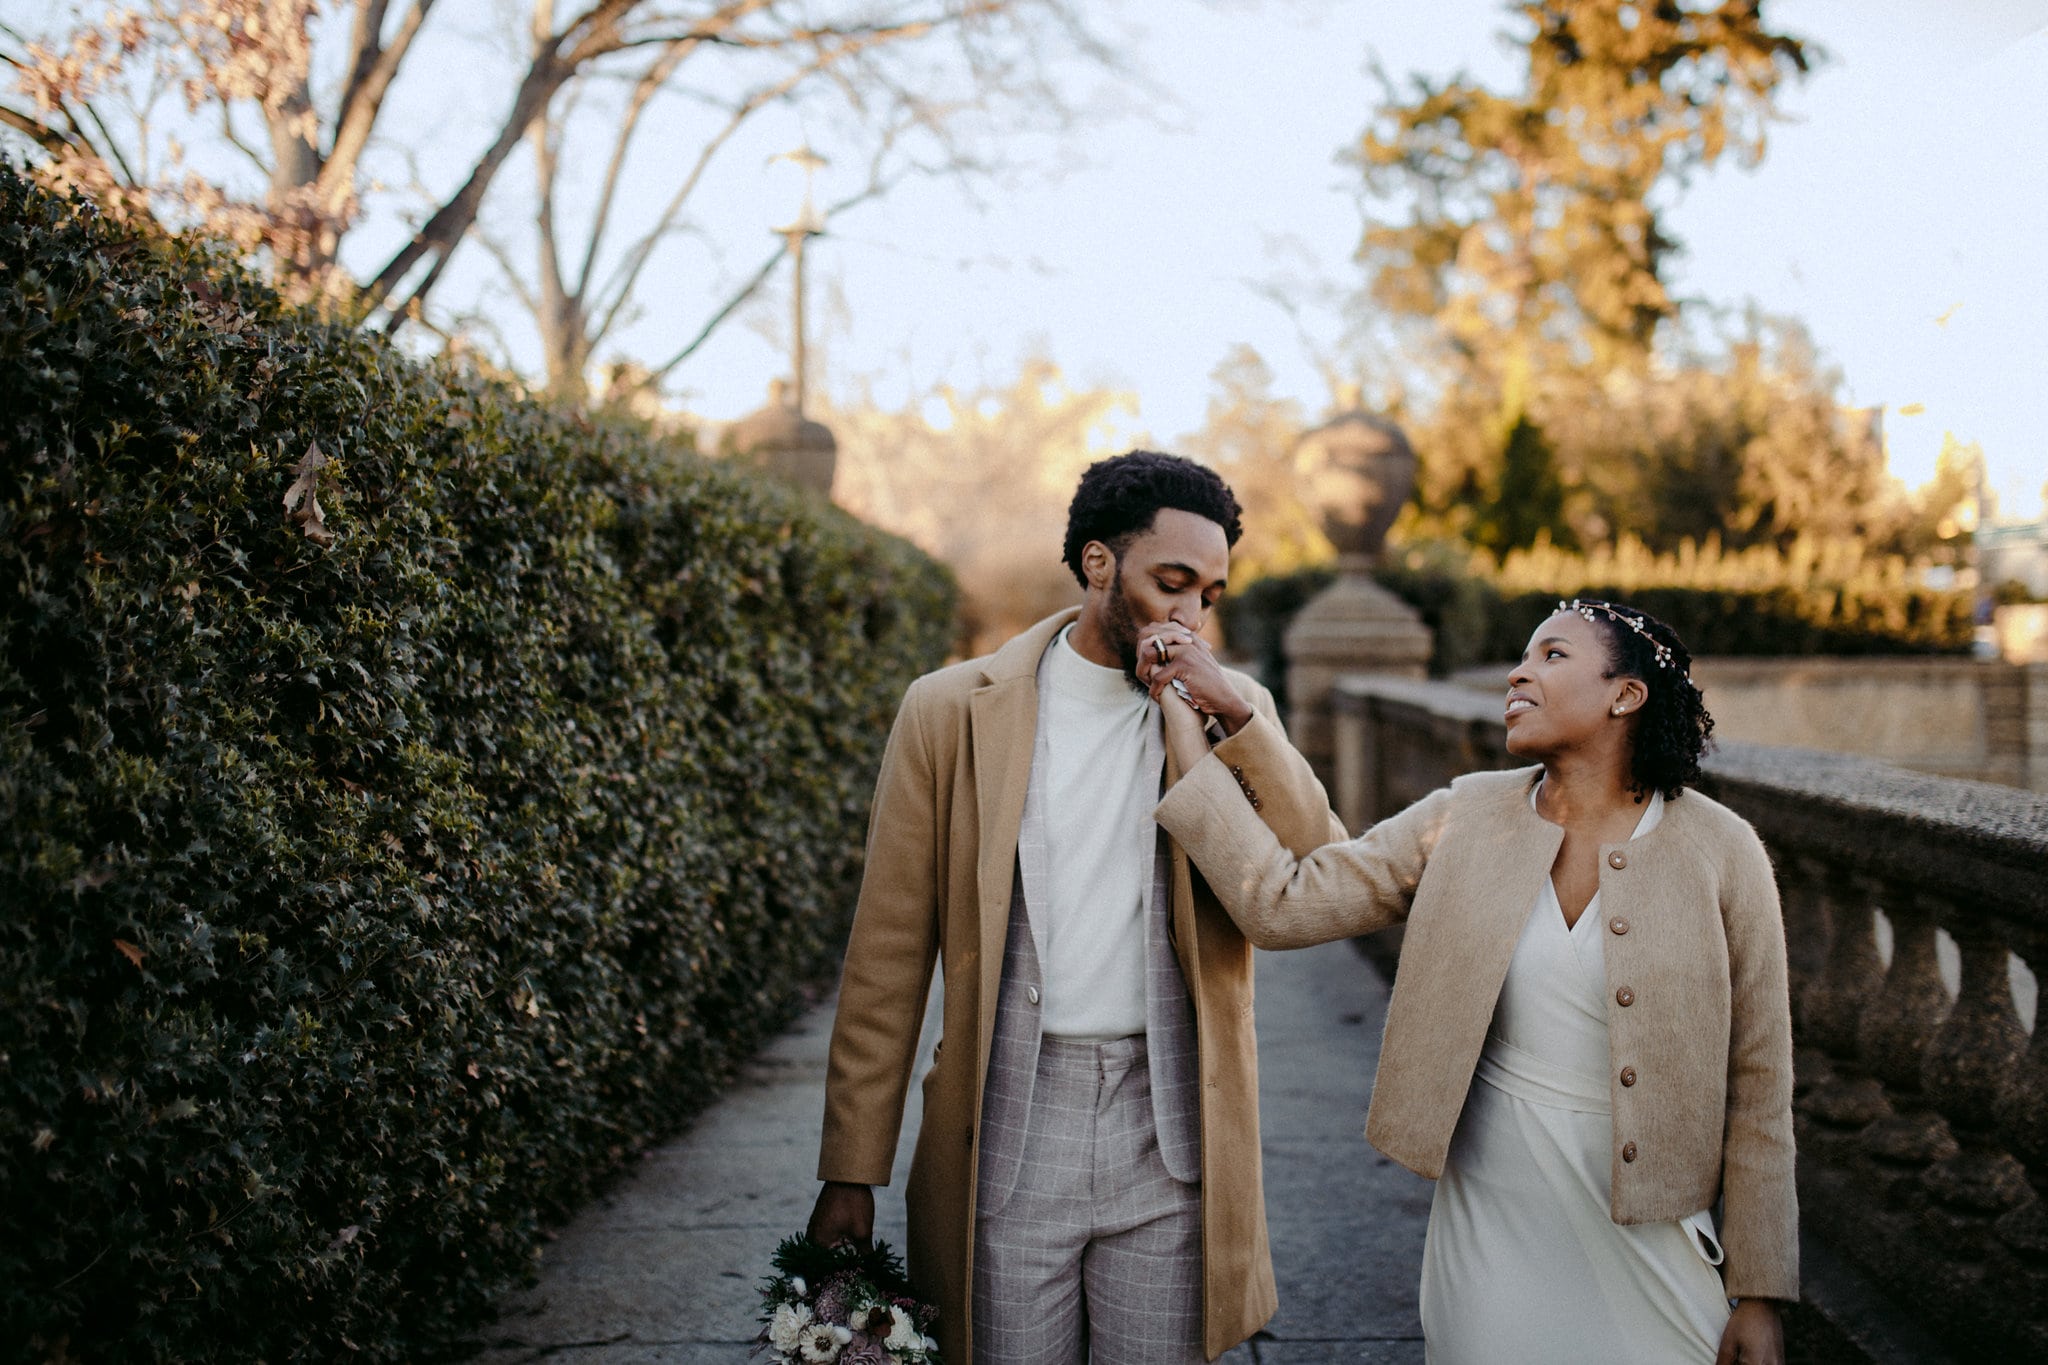 a groom kisses a brides hand and holds her bouquet as they walk in a park wearing jackets on a cold day